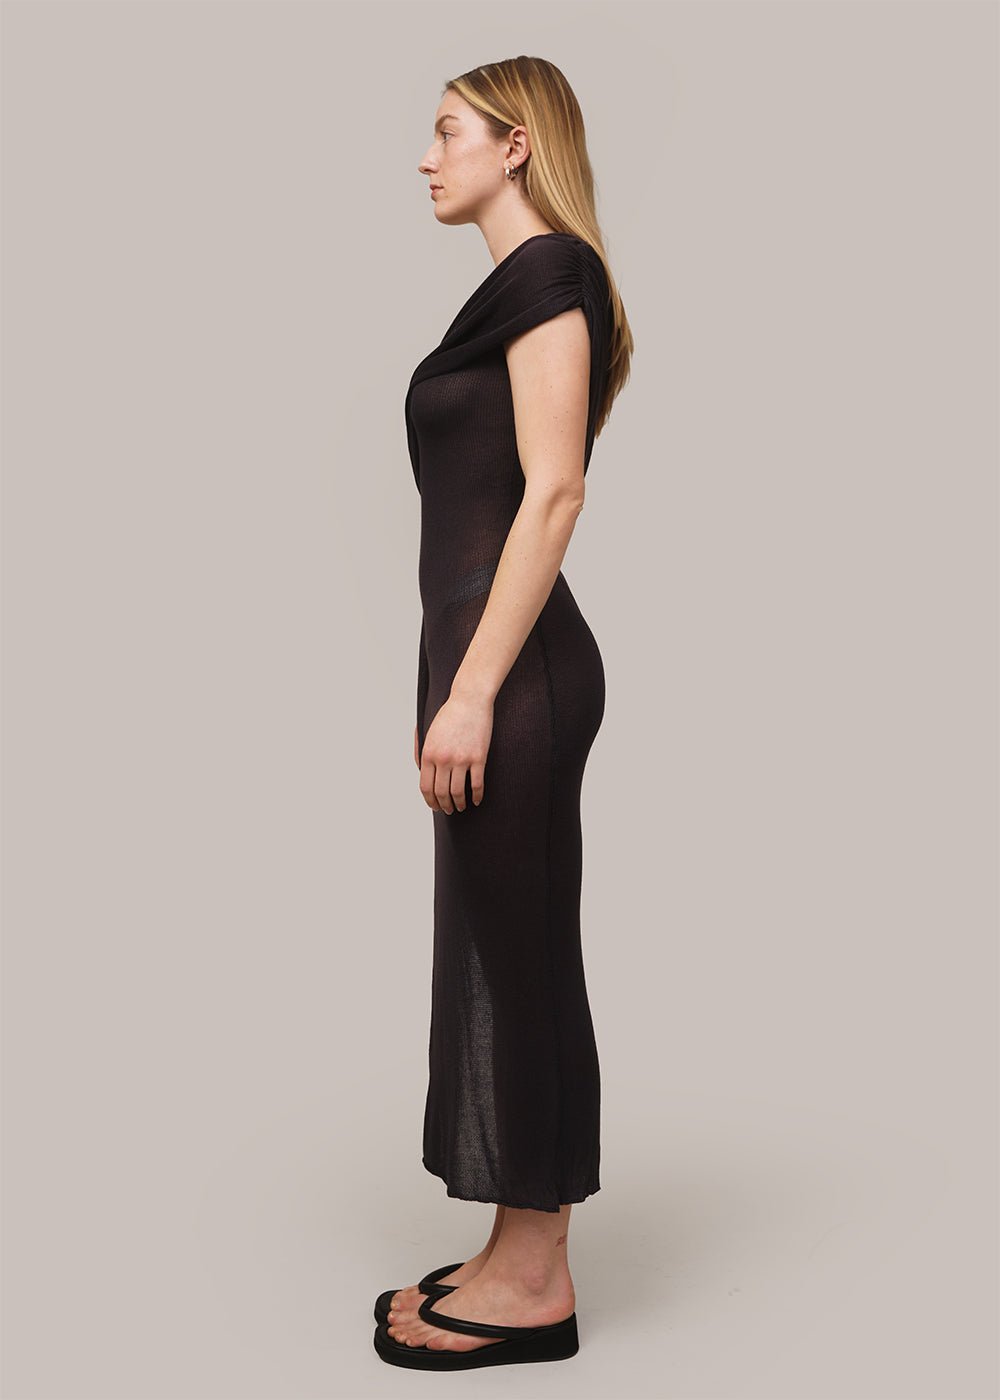 Belle The Label Slate Esme Dress - New Classics Studios Sustainable Ethical Fashion Canada